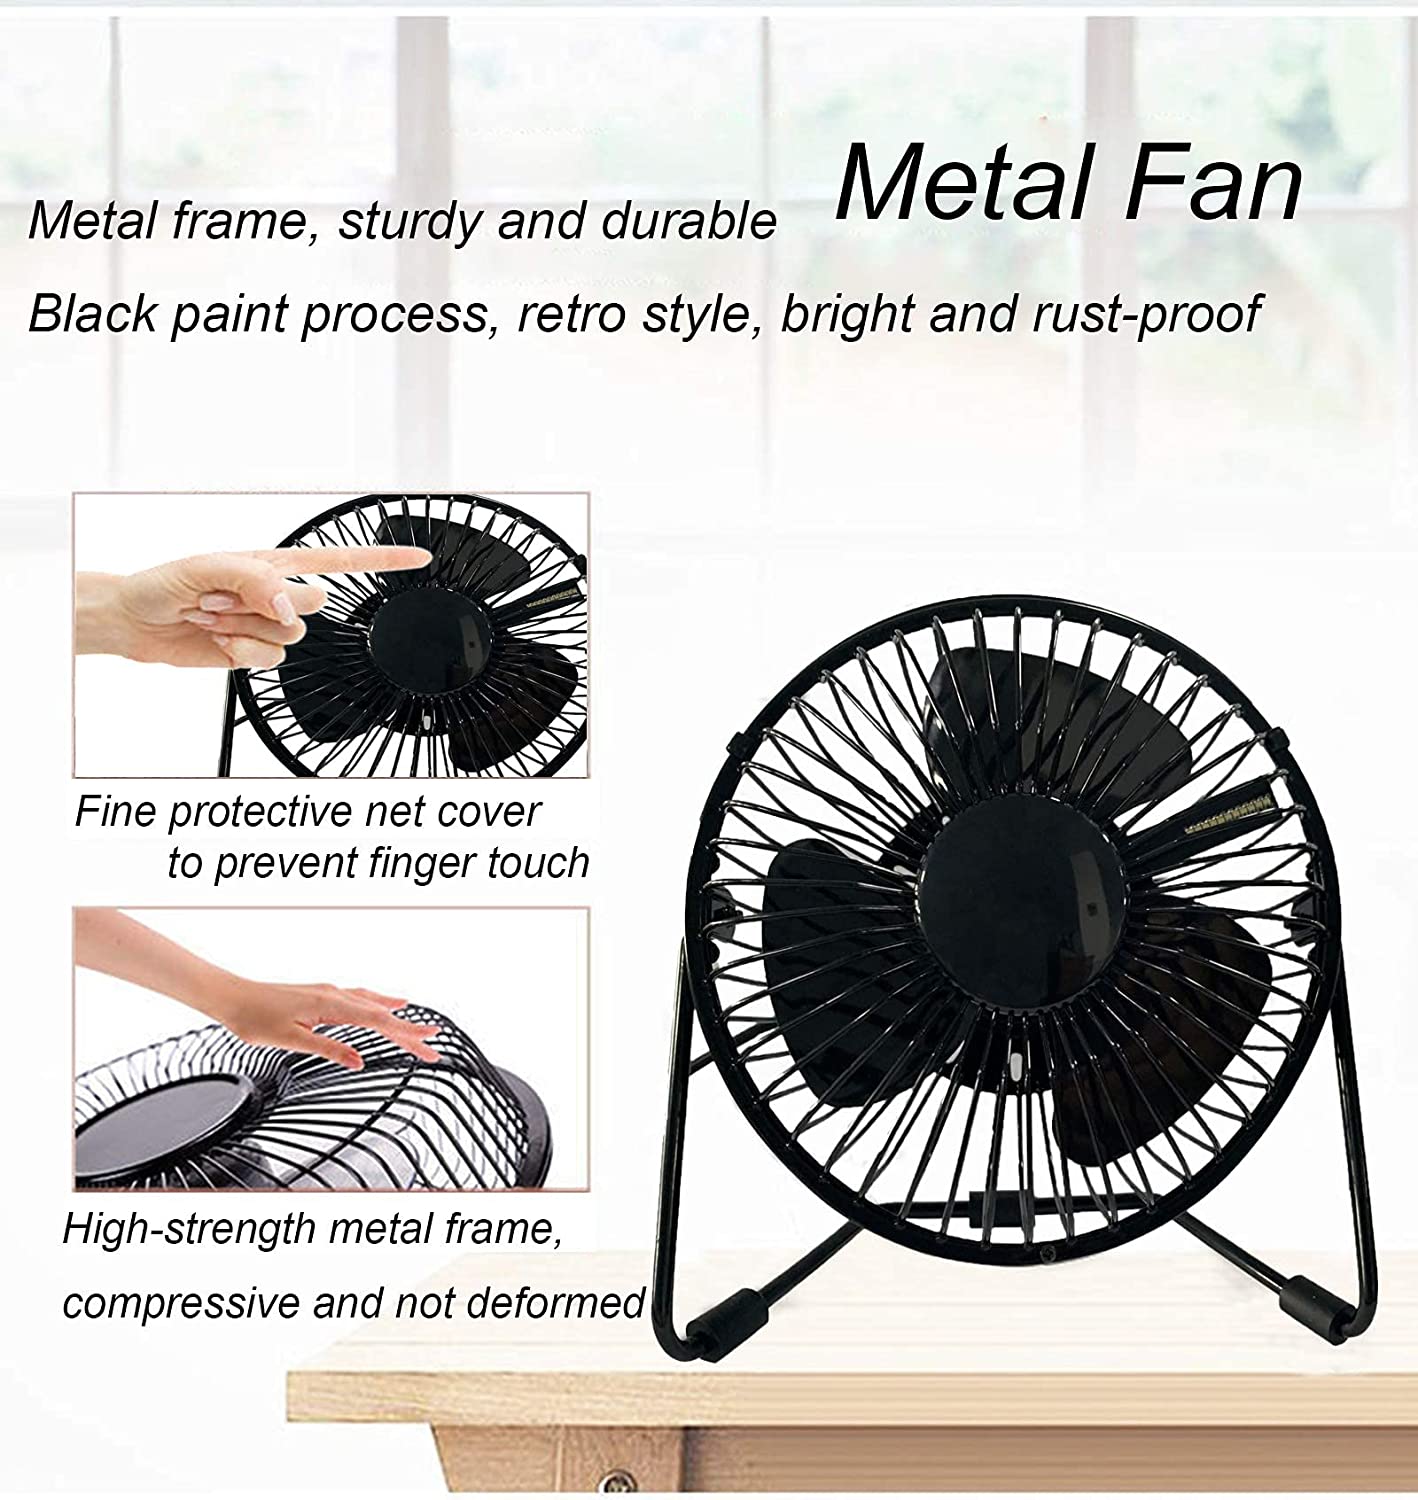 Smart-Home-Appliances-USB-Desk-Fan-With-LED-Time-Display-4-Inch-Portable-Metal-Frame-Cooling-Fan-360-Rotation-Low-Noise-Clock-Fan-for-Home-Office-46